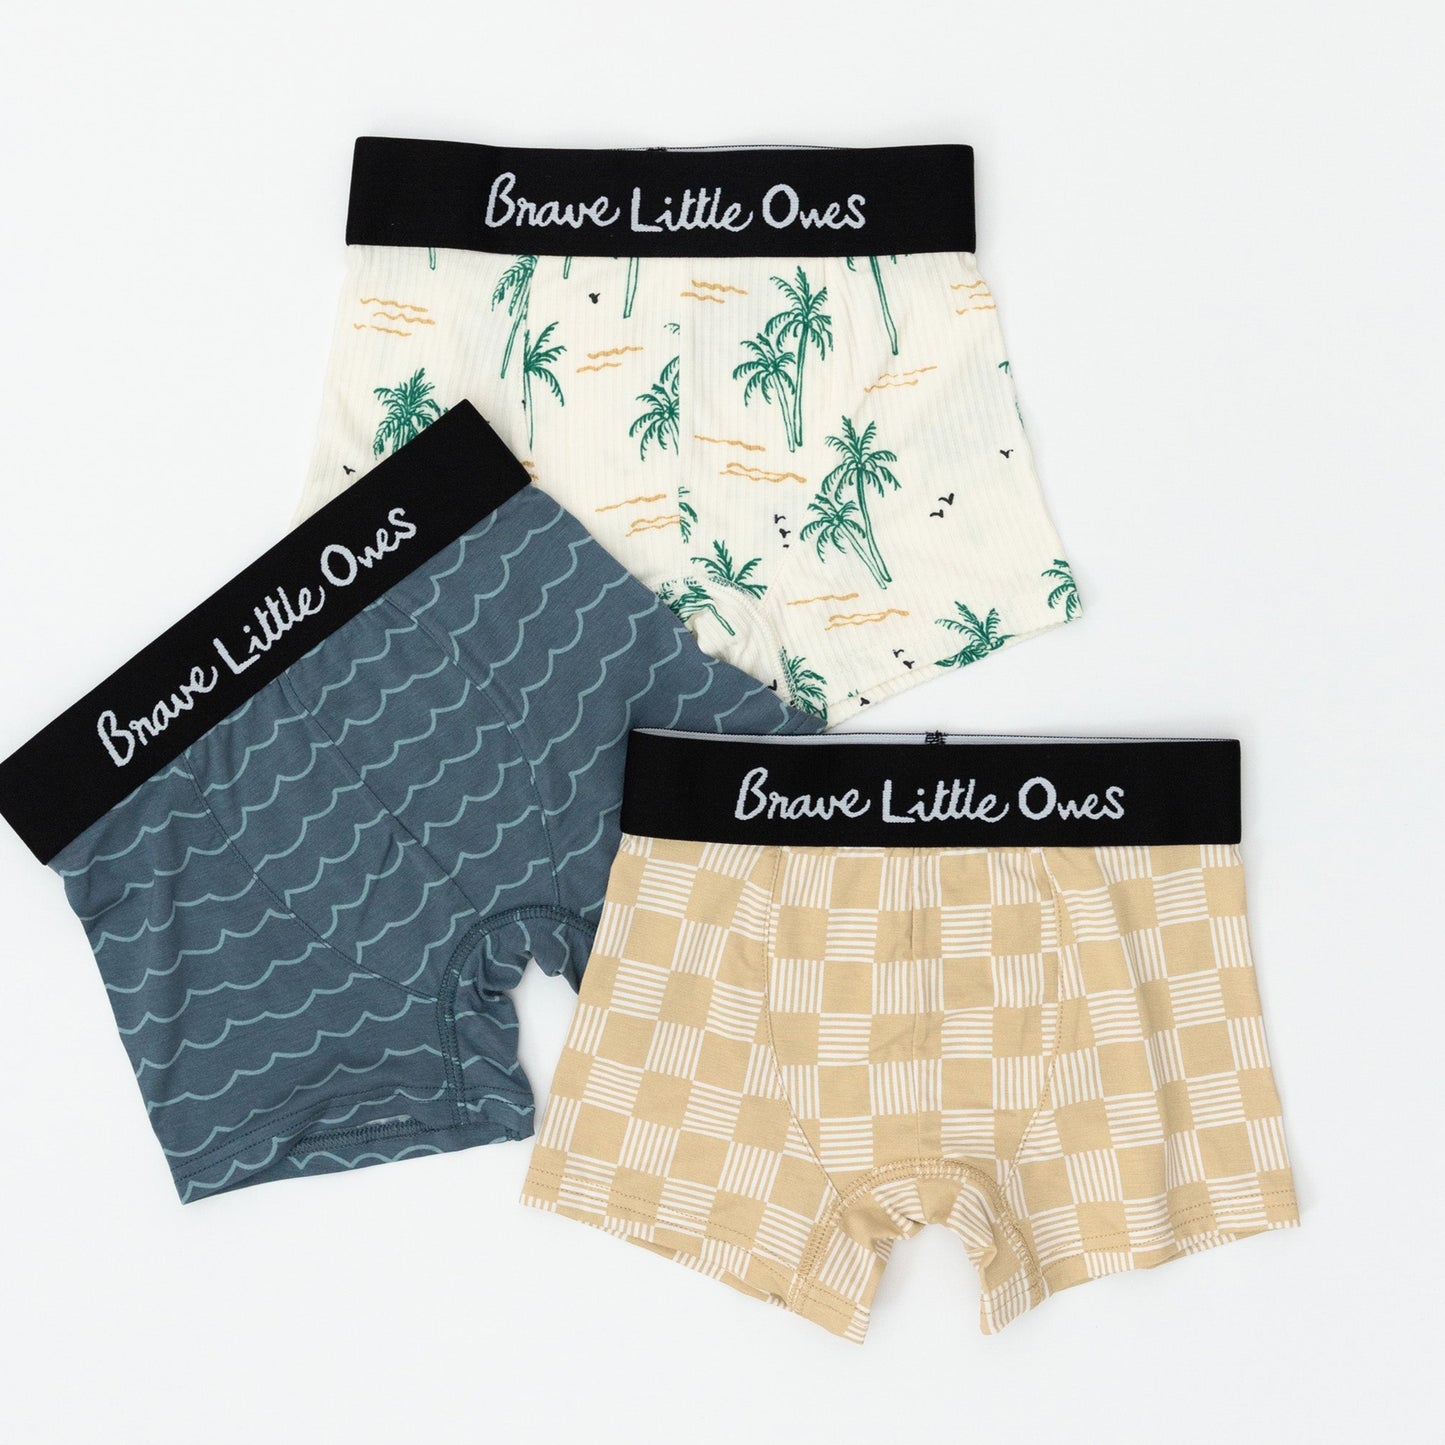 Checkered Lines, Waves and Palm Trees Boxer Brief 3 Pack